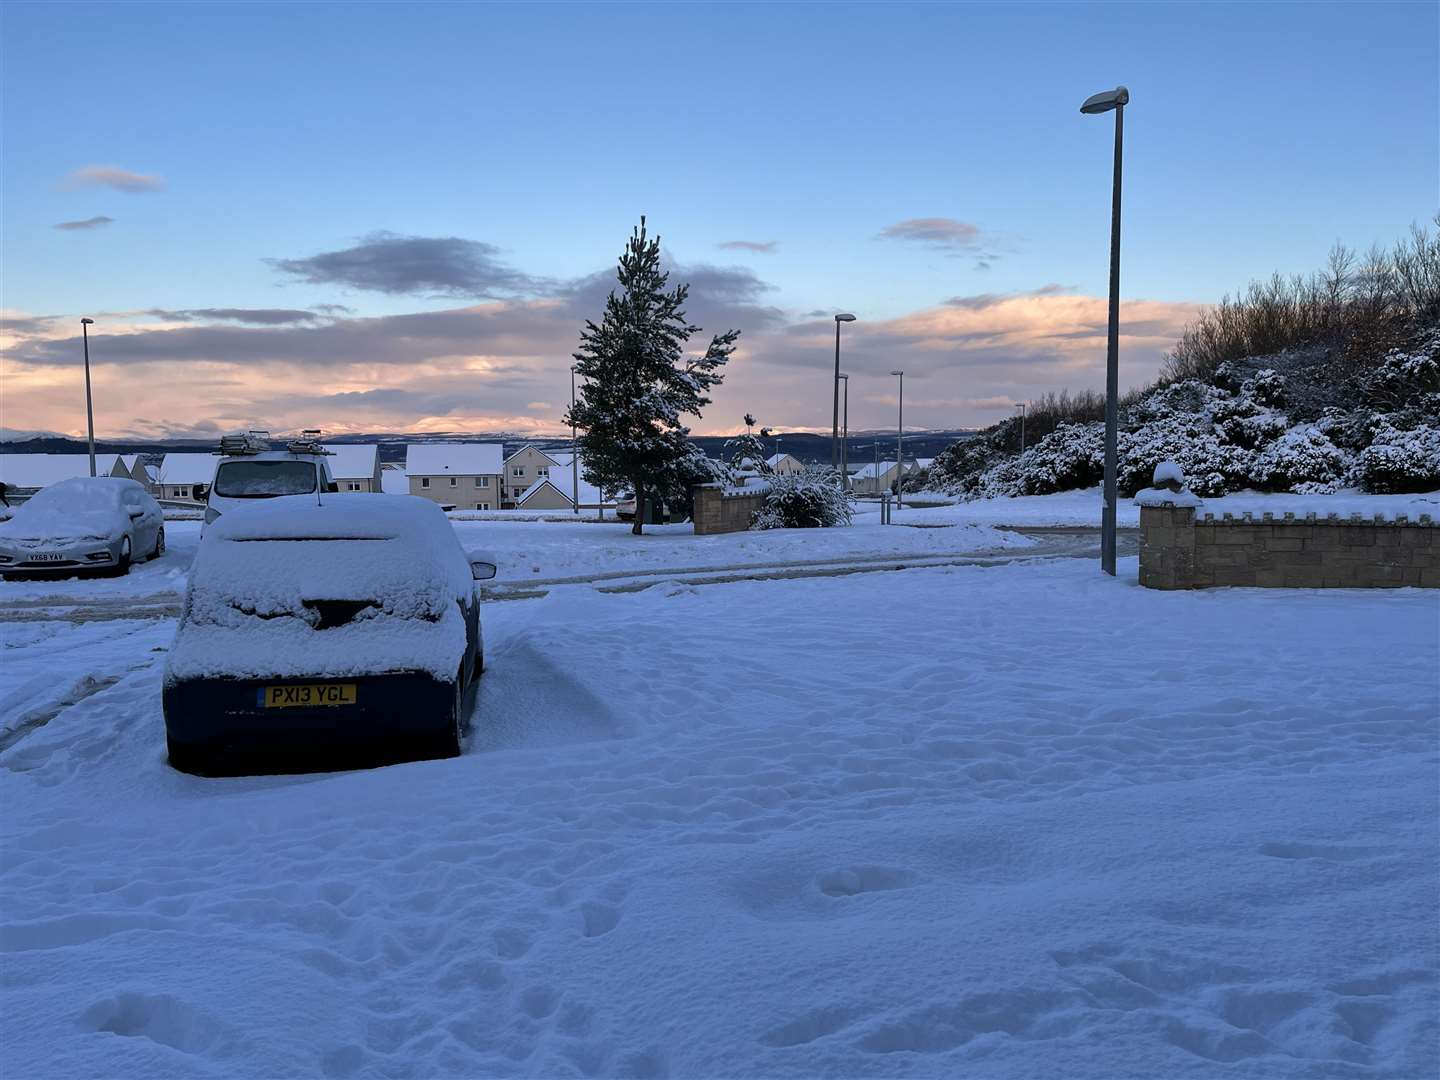 Snow in Milton of Leys in Inverness.